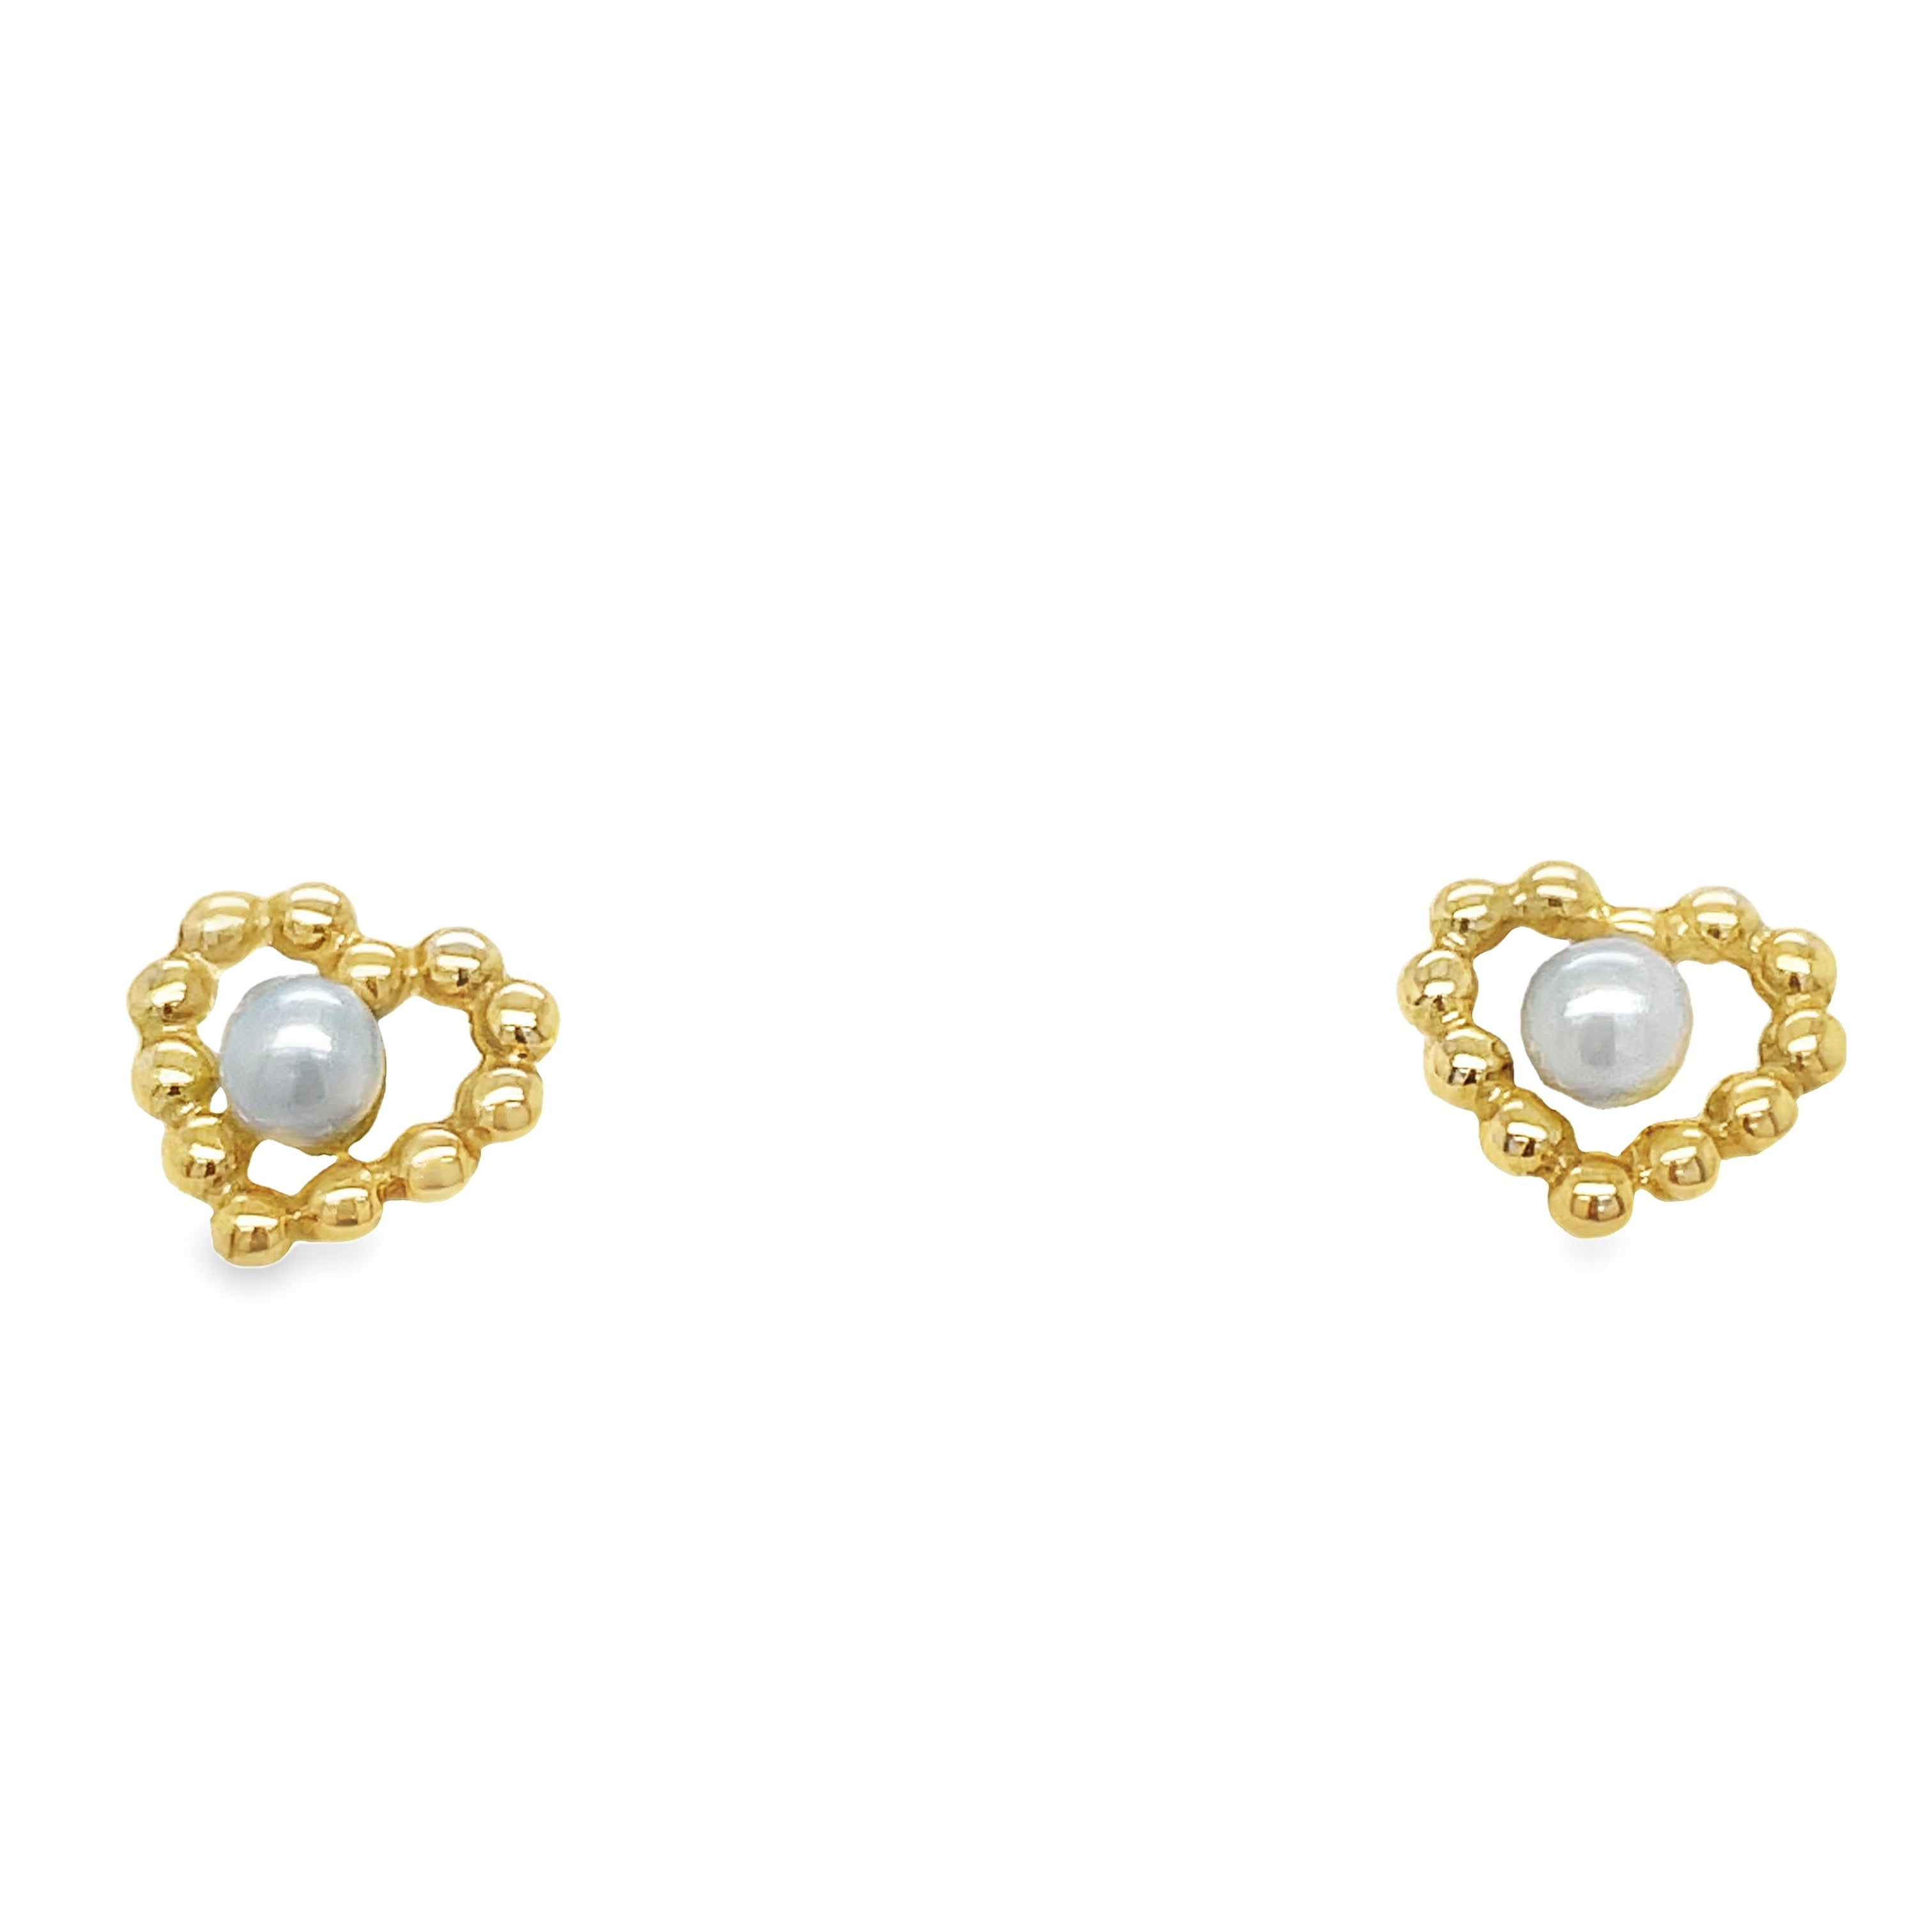 <p><span style="font-size: 0.875rem;">These exquisite flower earrings for babies feature 14k yellow gold construction with heart shape pearl shape securely affixed using baby screw backs.</span></p> <p>&nbsp;</p>